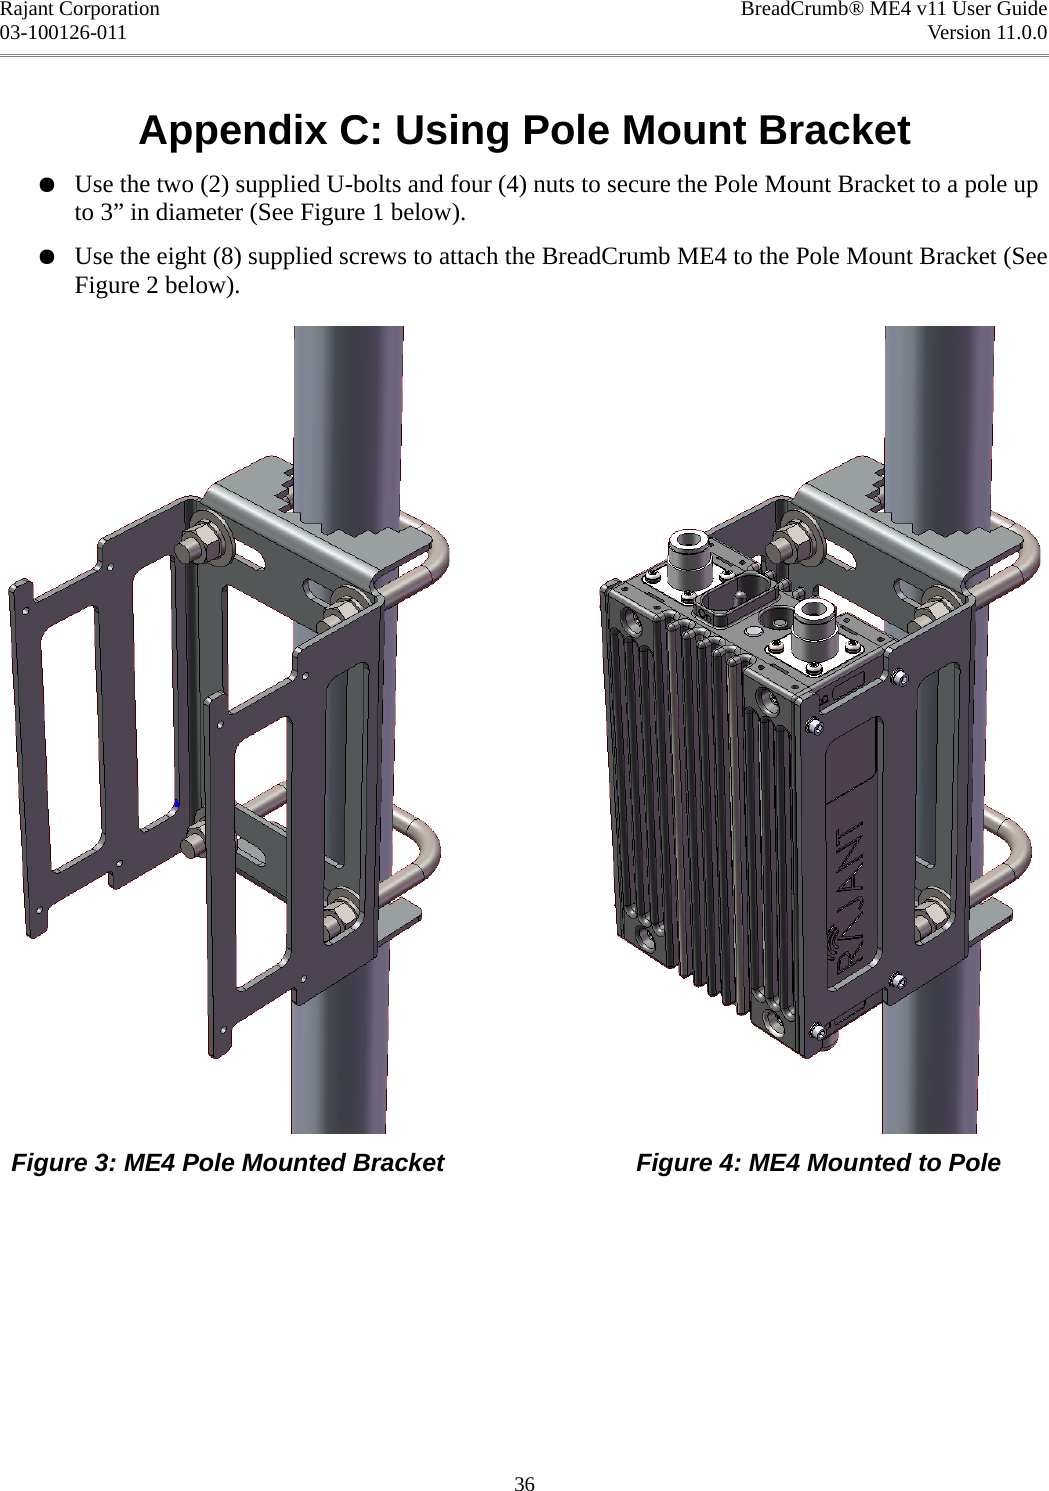 Rajant Corporation BreadCrumb® ME4 v11 User Guide03-100126-011 Version 11.0.0Appendix C: Using Pole Mount Bracket●Use the two (2) supplied U-bolts and four (4) nuts to secure the Pole Mount Bracket to a pole up to 3” in diameter (See Figure 1 below).●Use the eight (8) supplied screws to attach the BreadCrumb ME4 to the Pole Mount Bracket (See Figure 2 below).Figure 3: ME4 Pole Mounted Bracket Figure 4: ME4 Mounted to Pole36